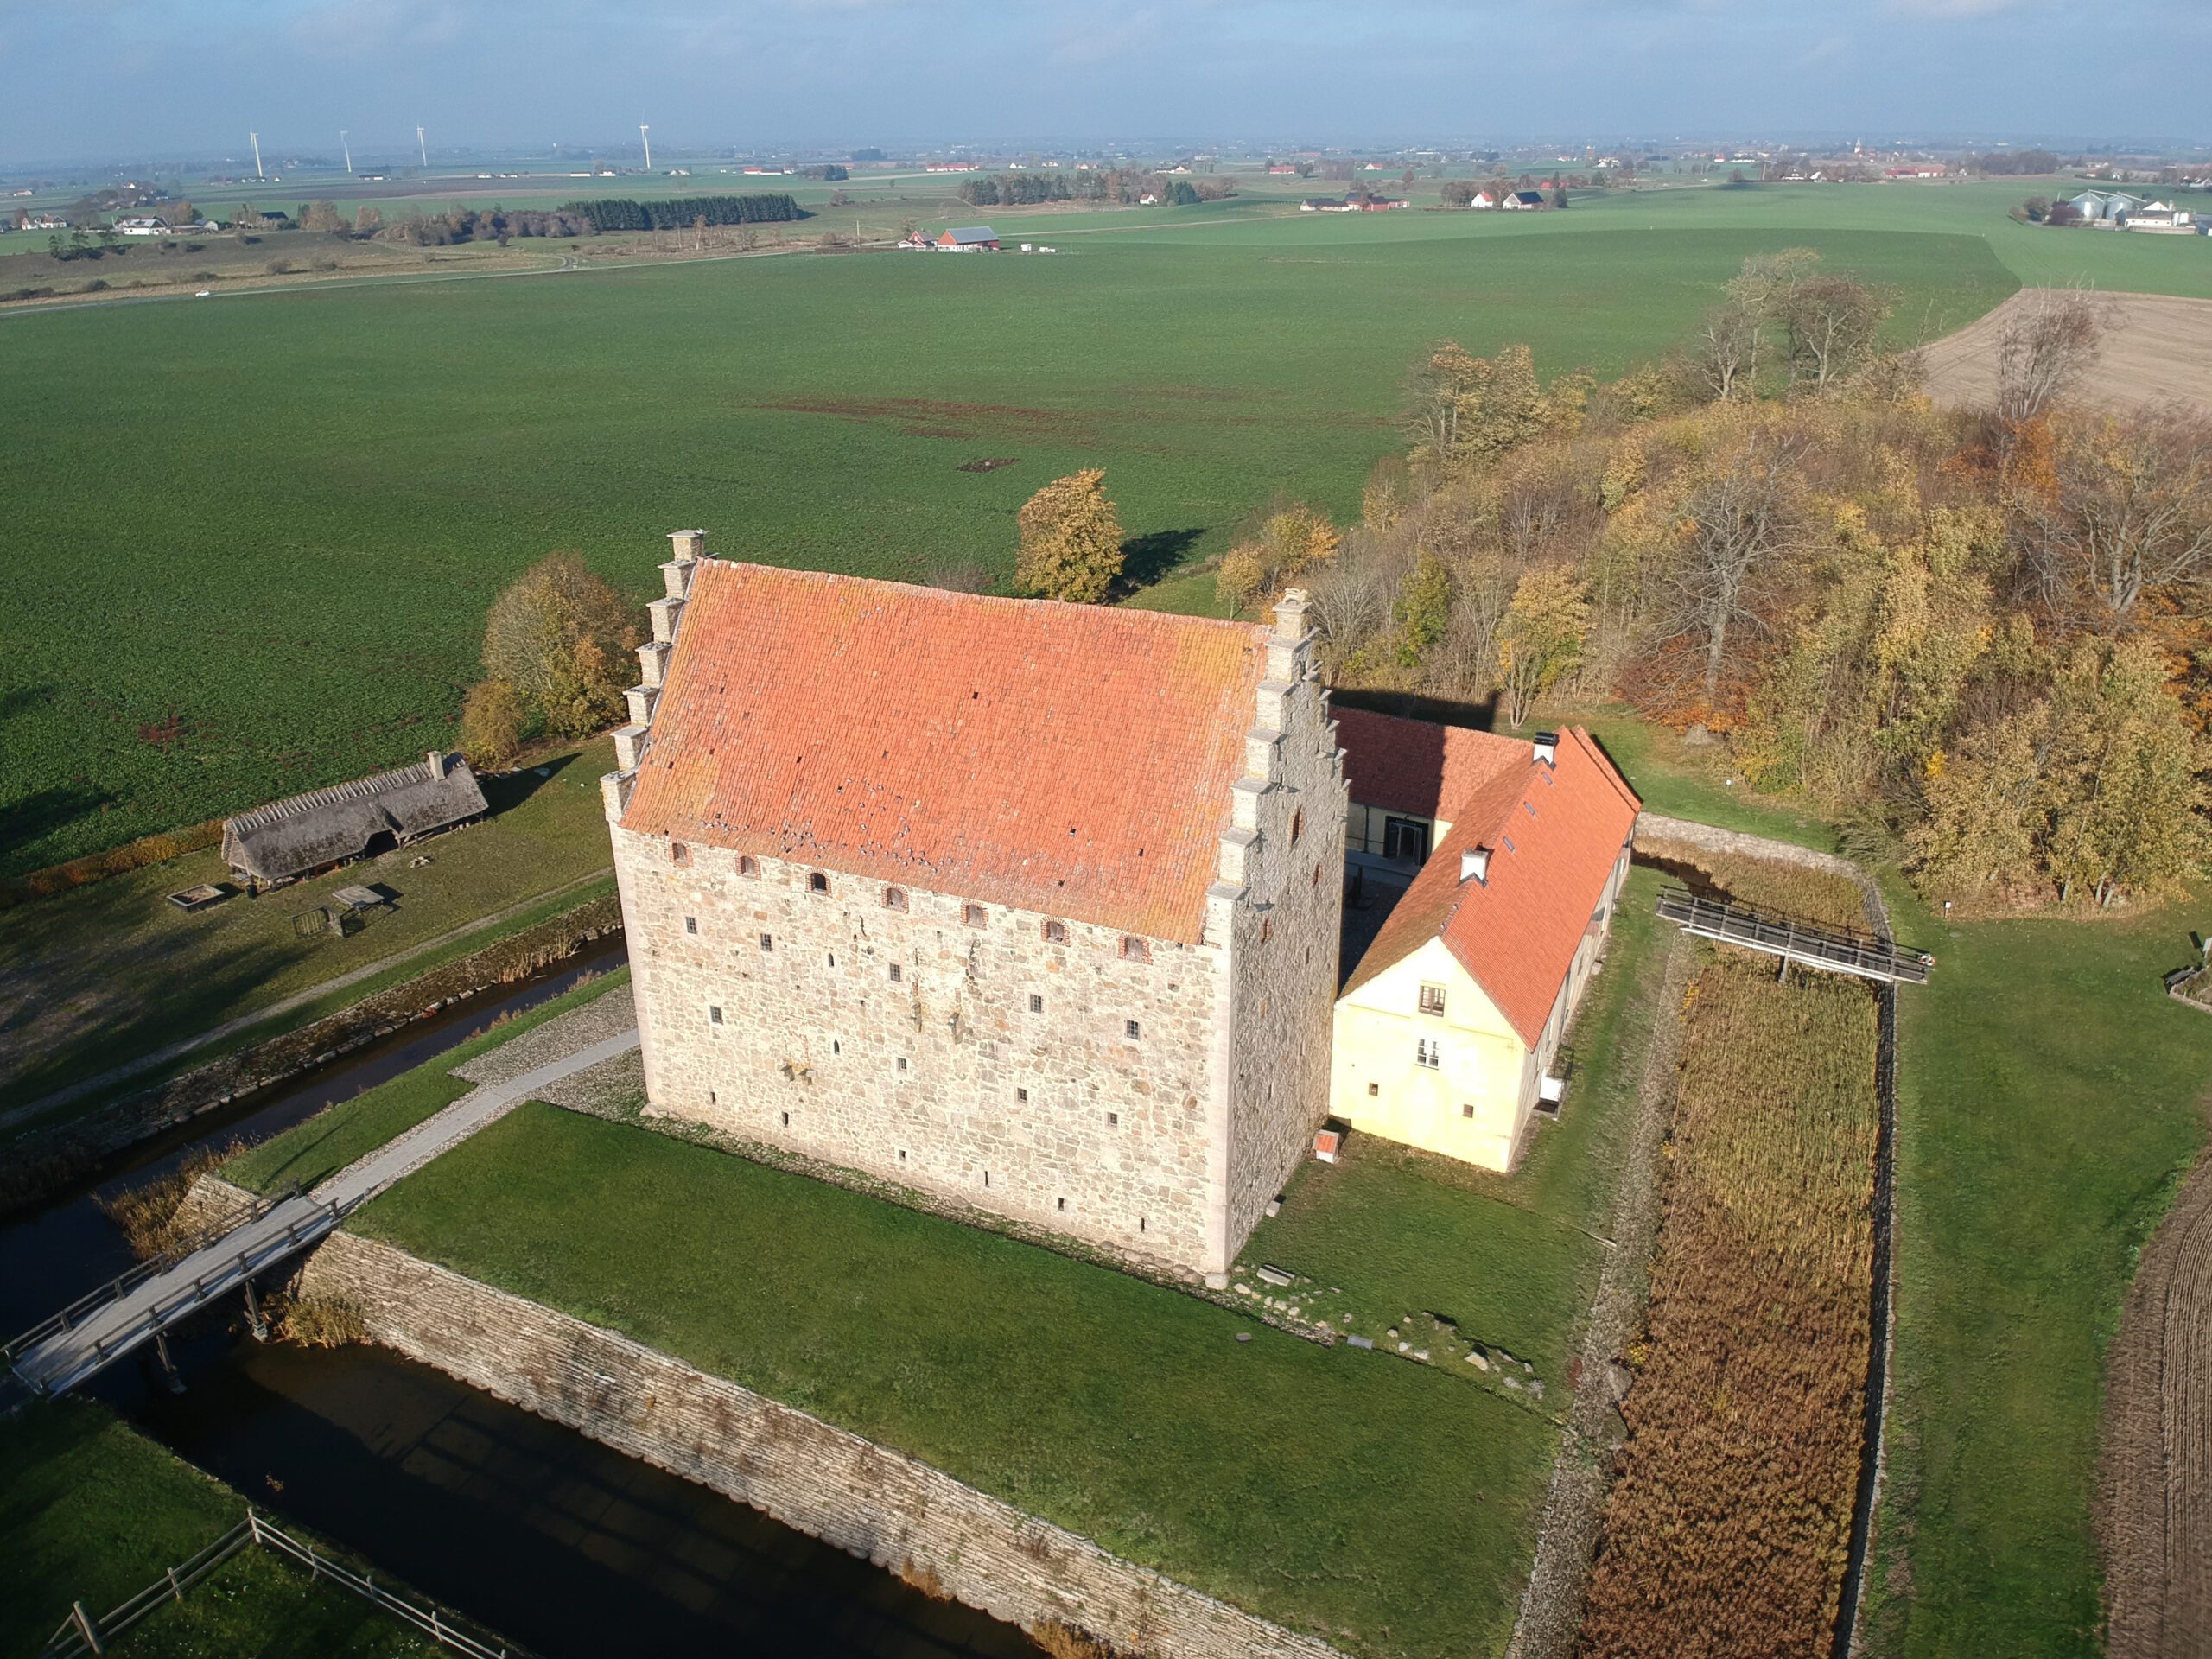 The castle seen from above from a drone. A square moat surrounds the castle yard, where two of the houses can also be seen. To the left, green fields.